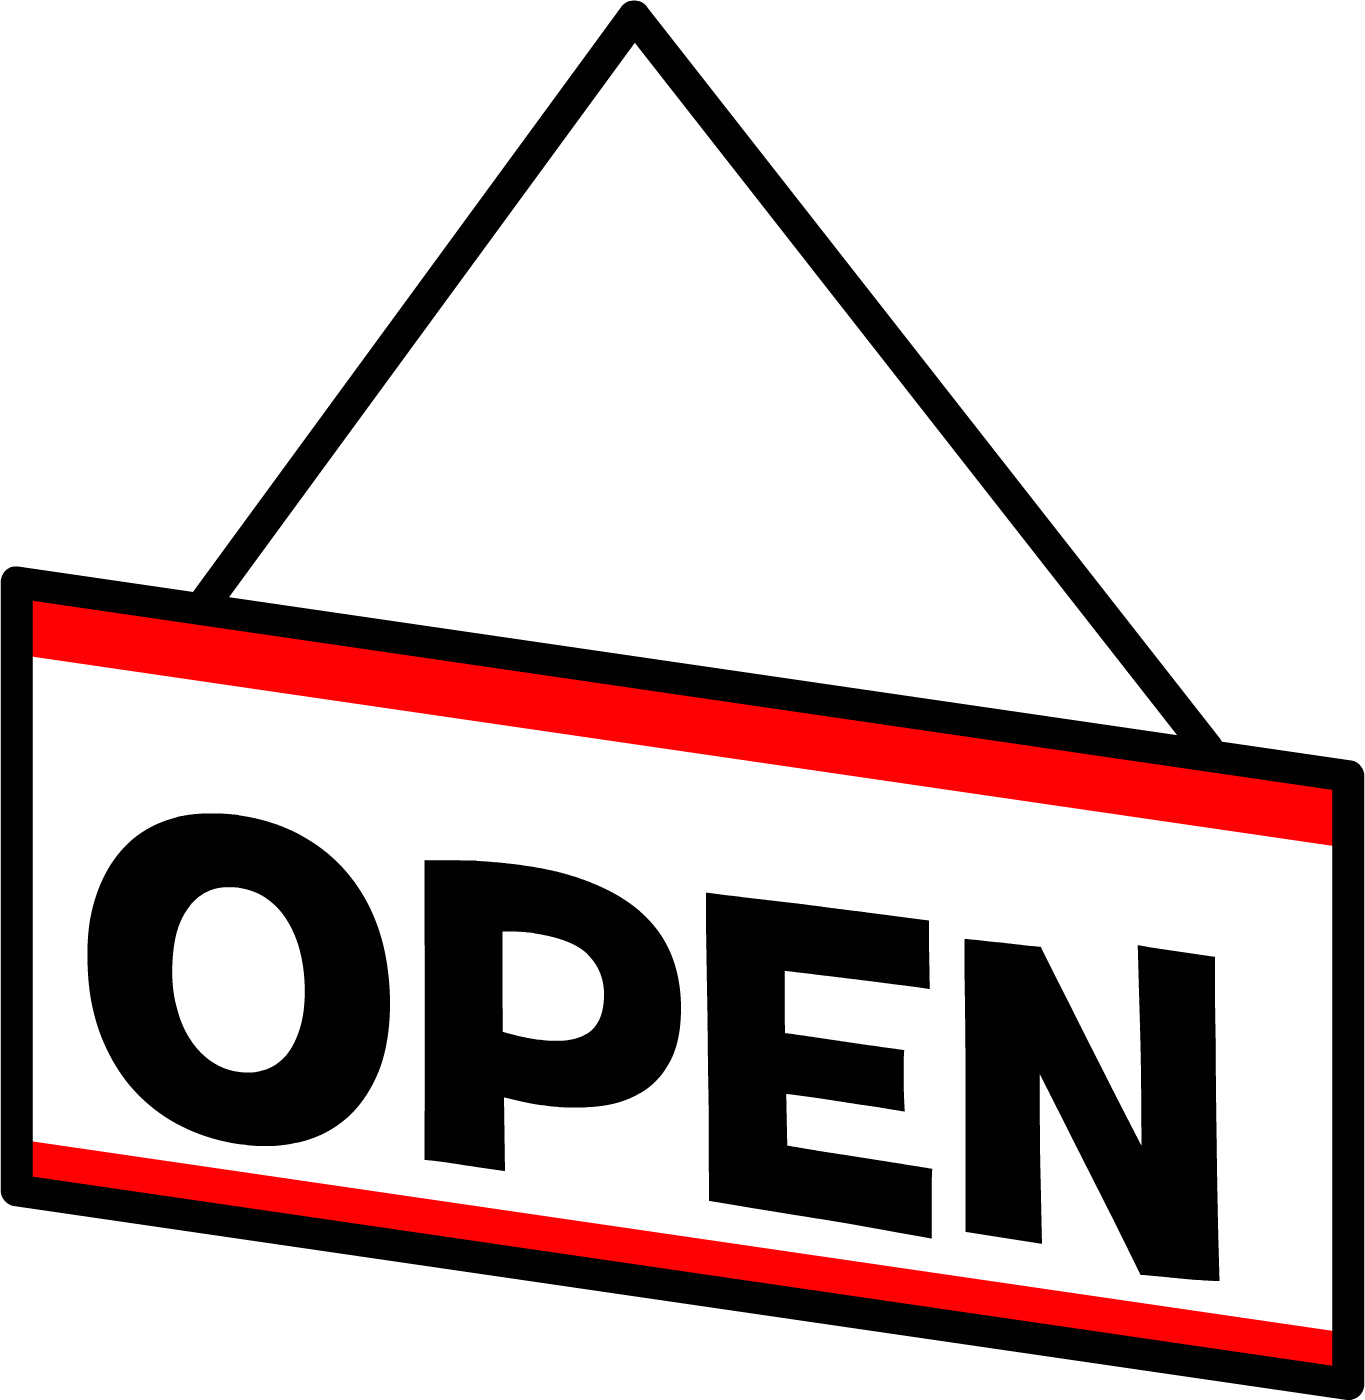 Open-closed Sign Sprite 005 - Portable Network Graphics (1365x1400)